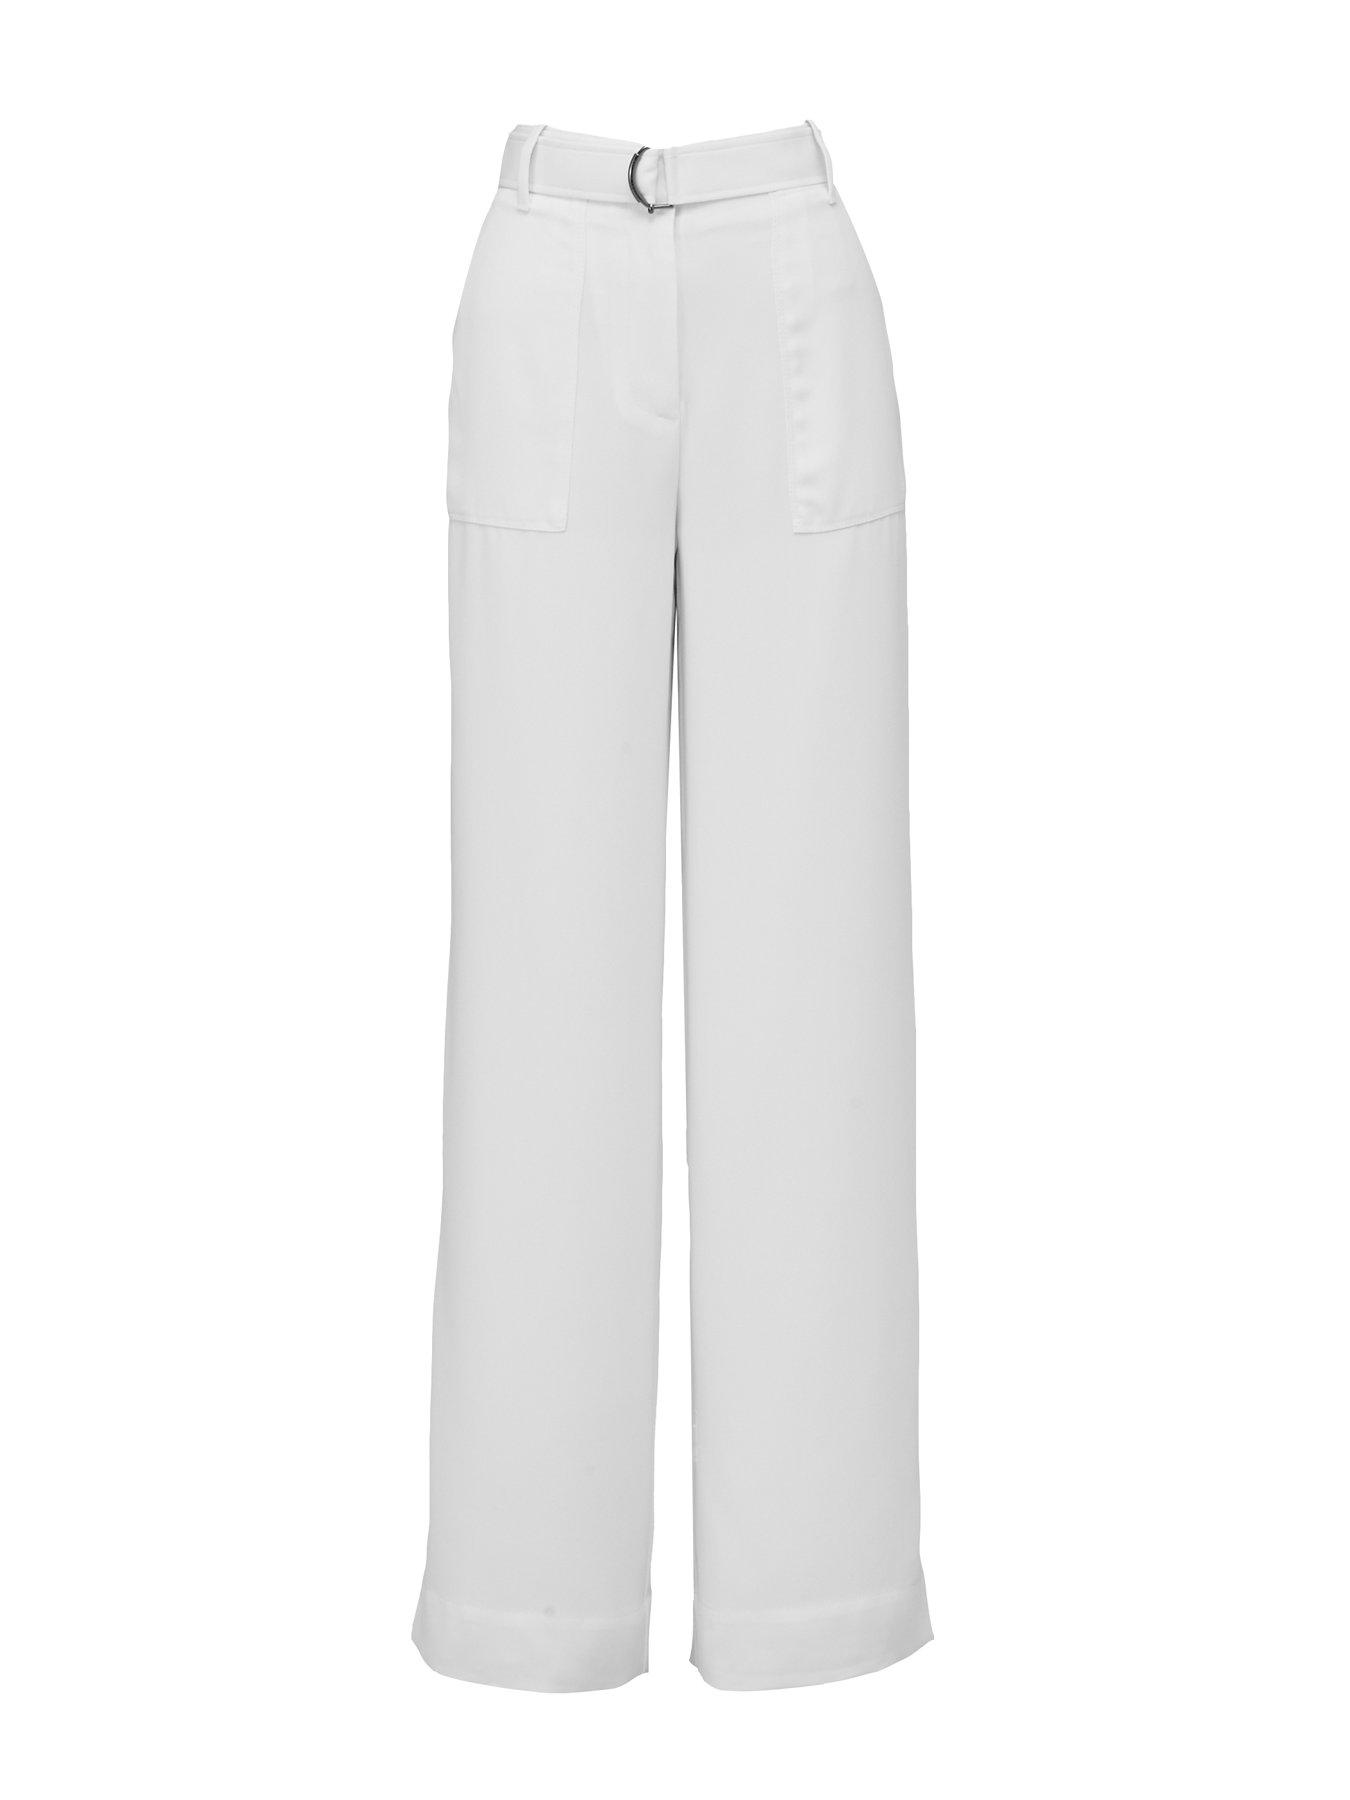 tommy hilfiger womens trousers sale